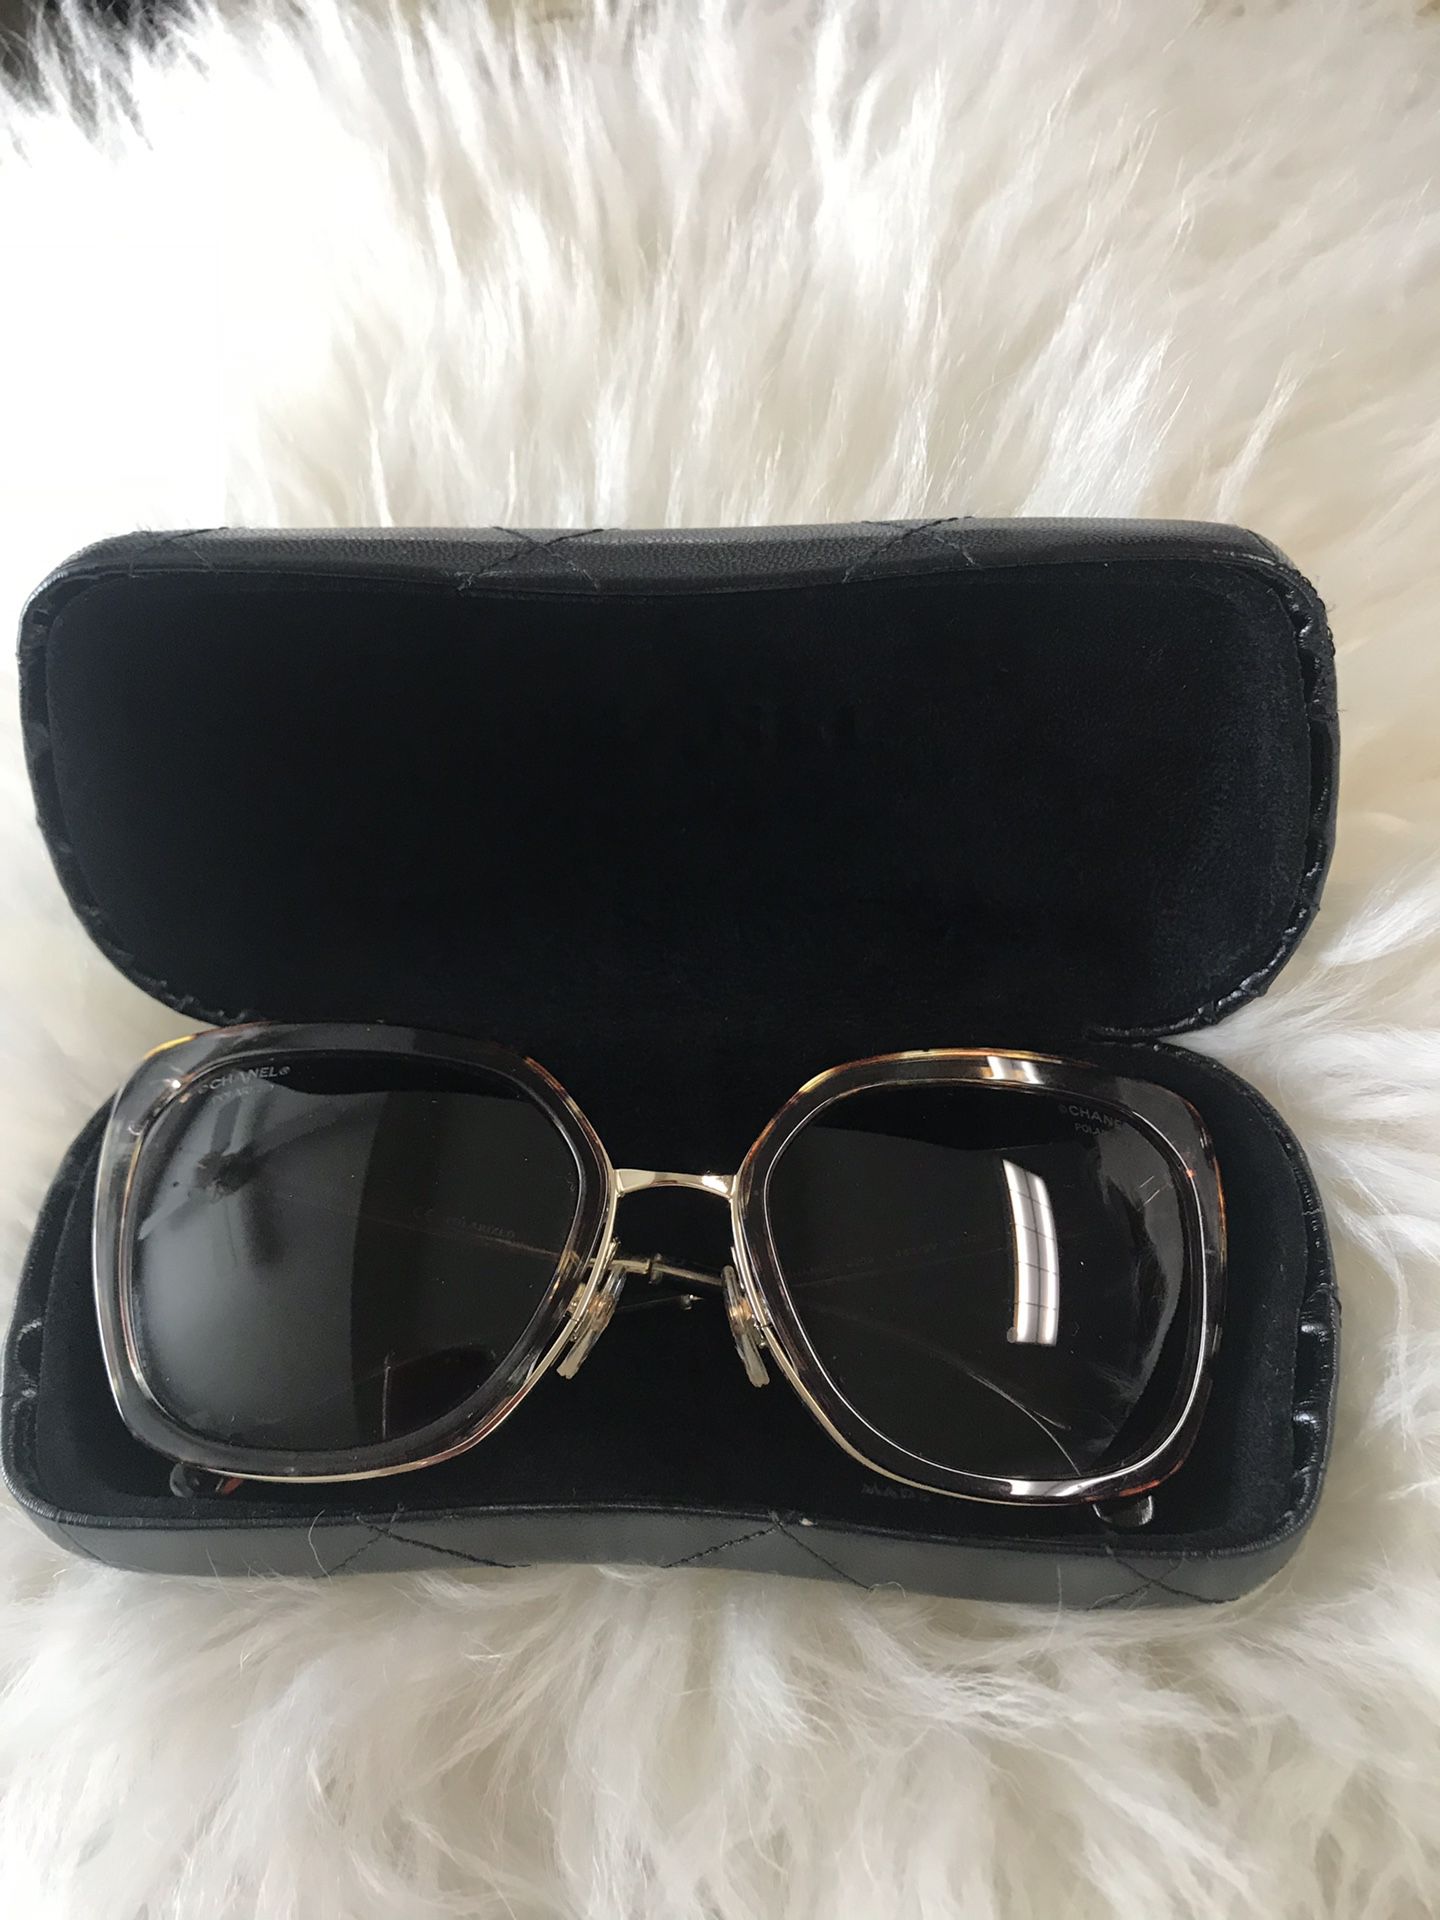 chanel sunglasses leather sides